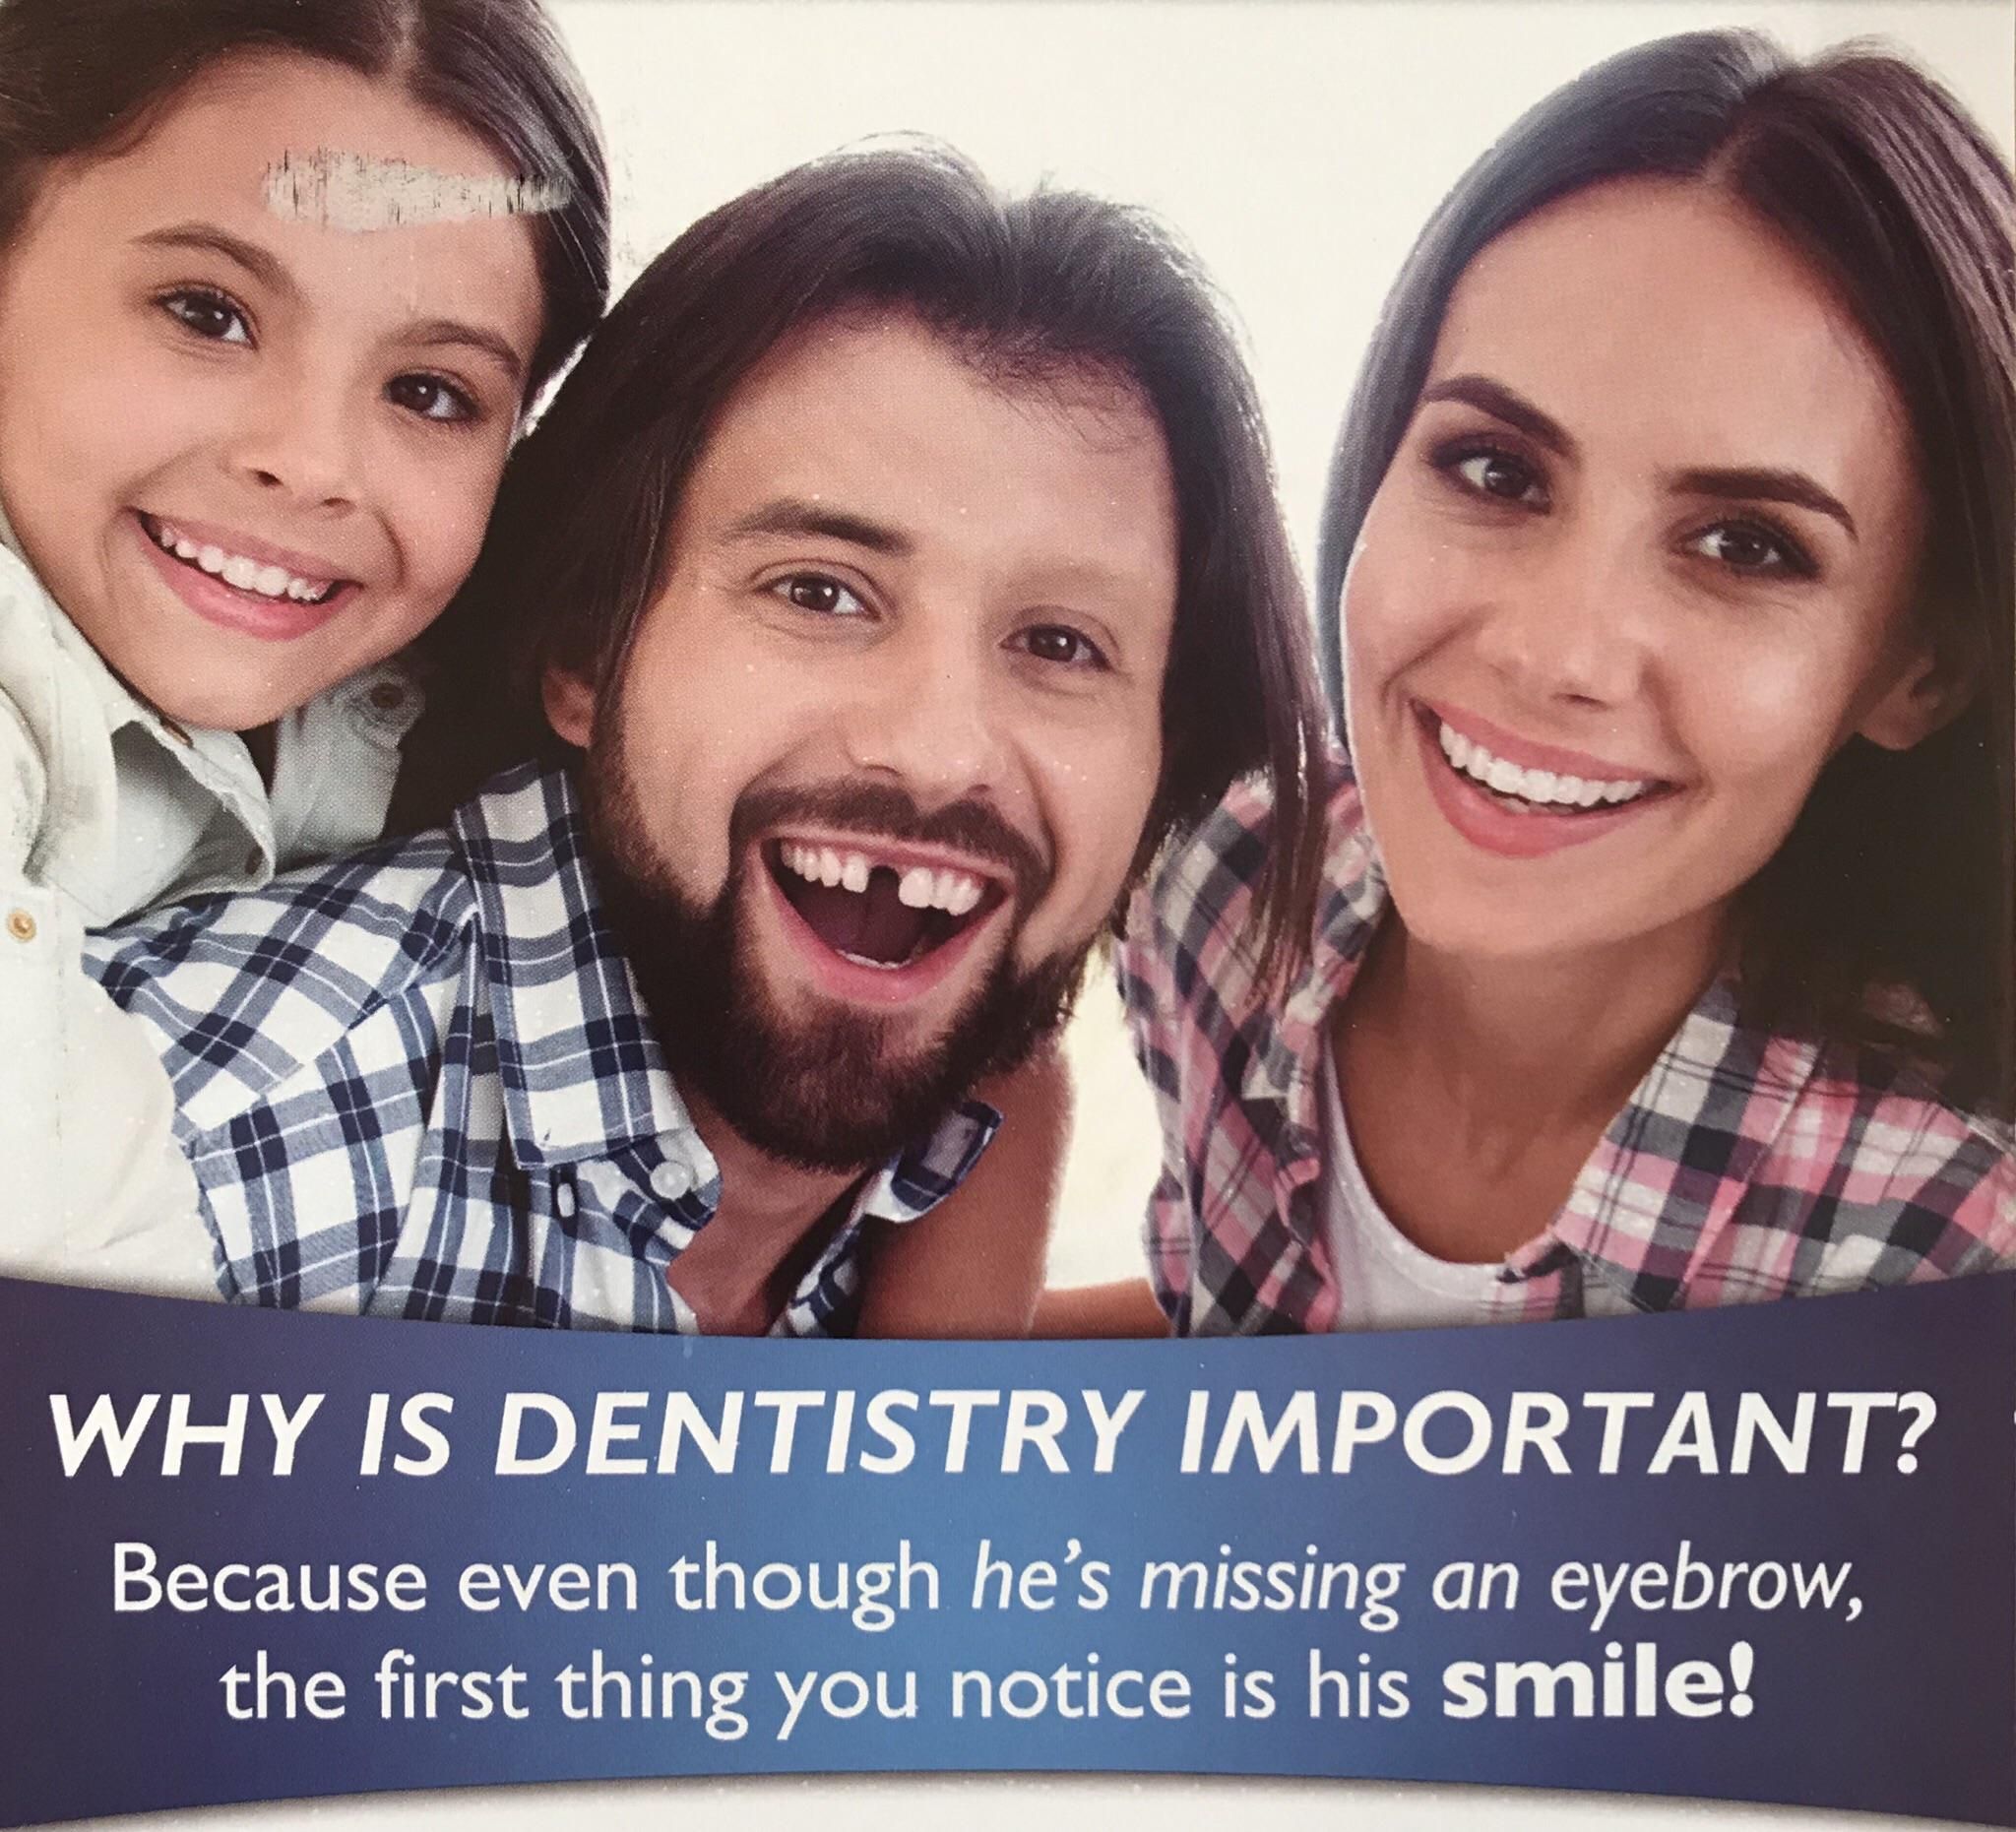 This advertisement from a dental office